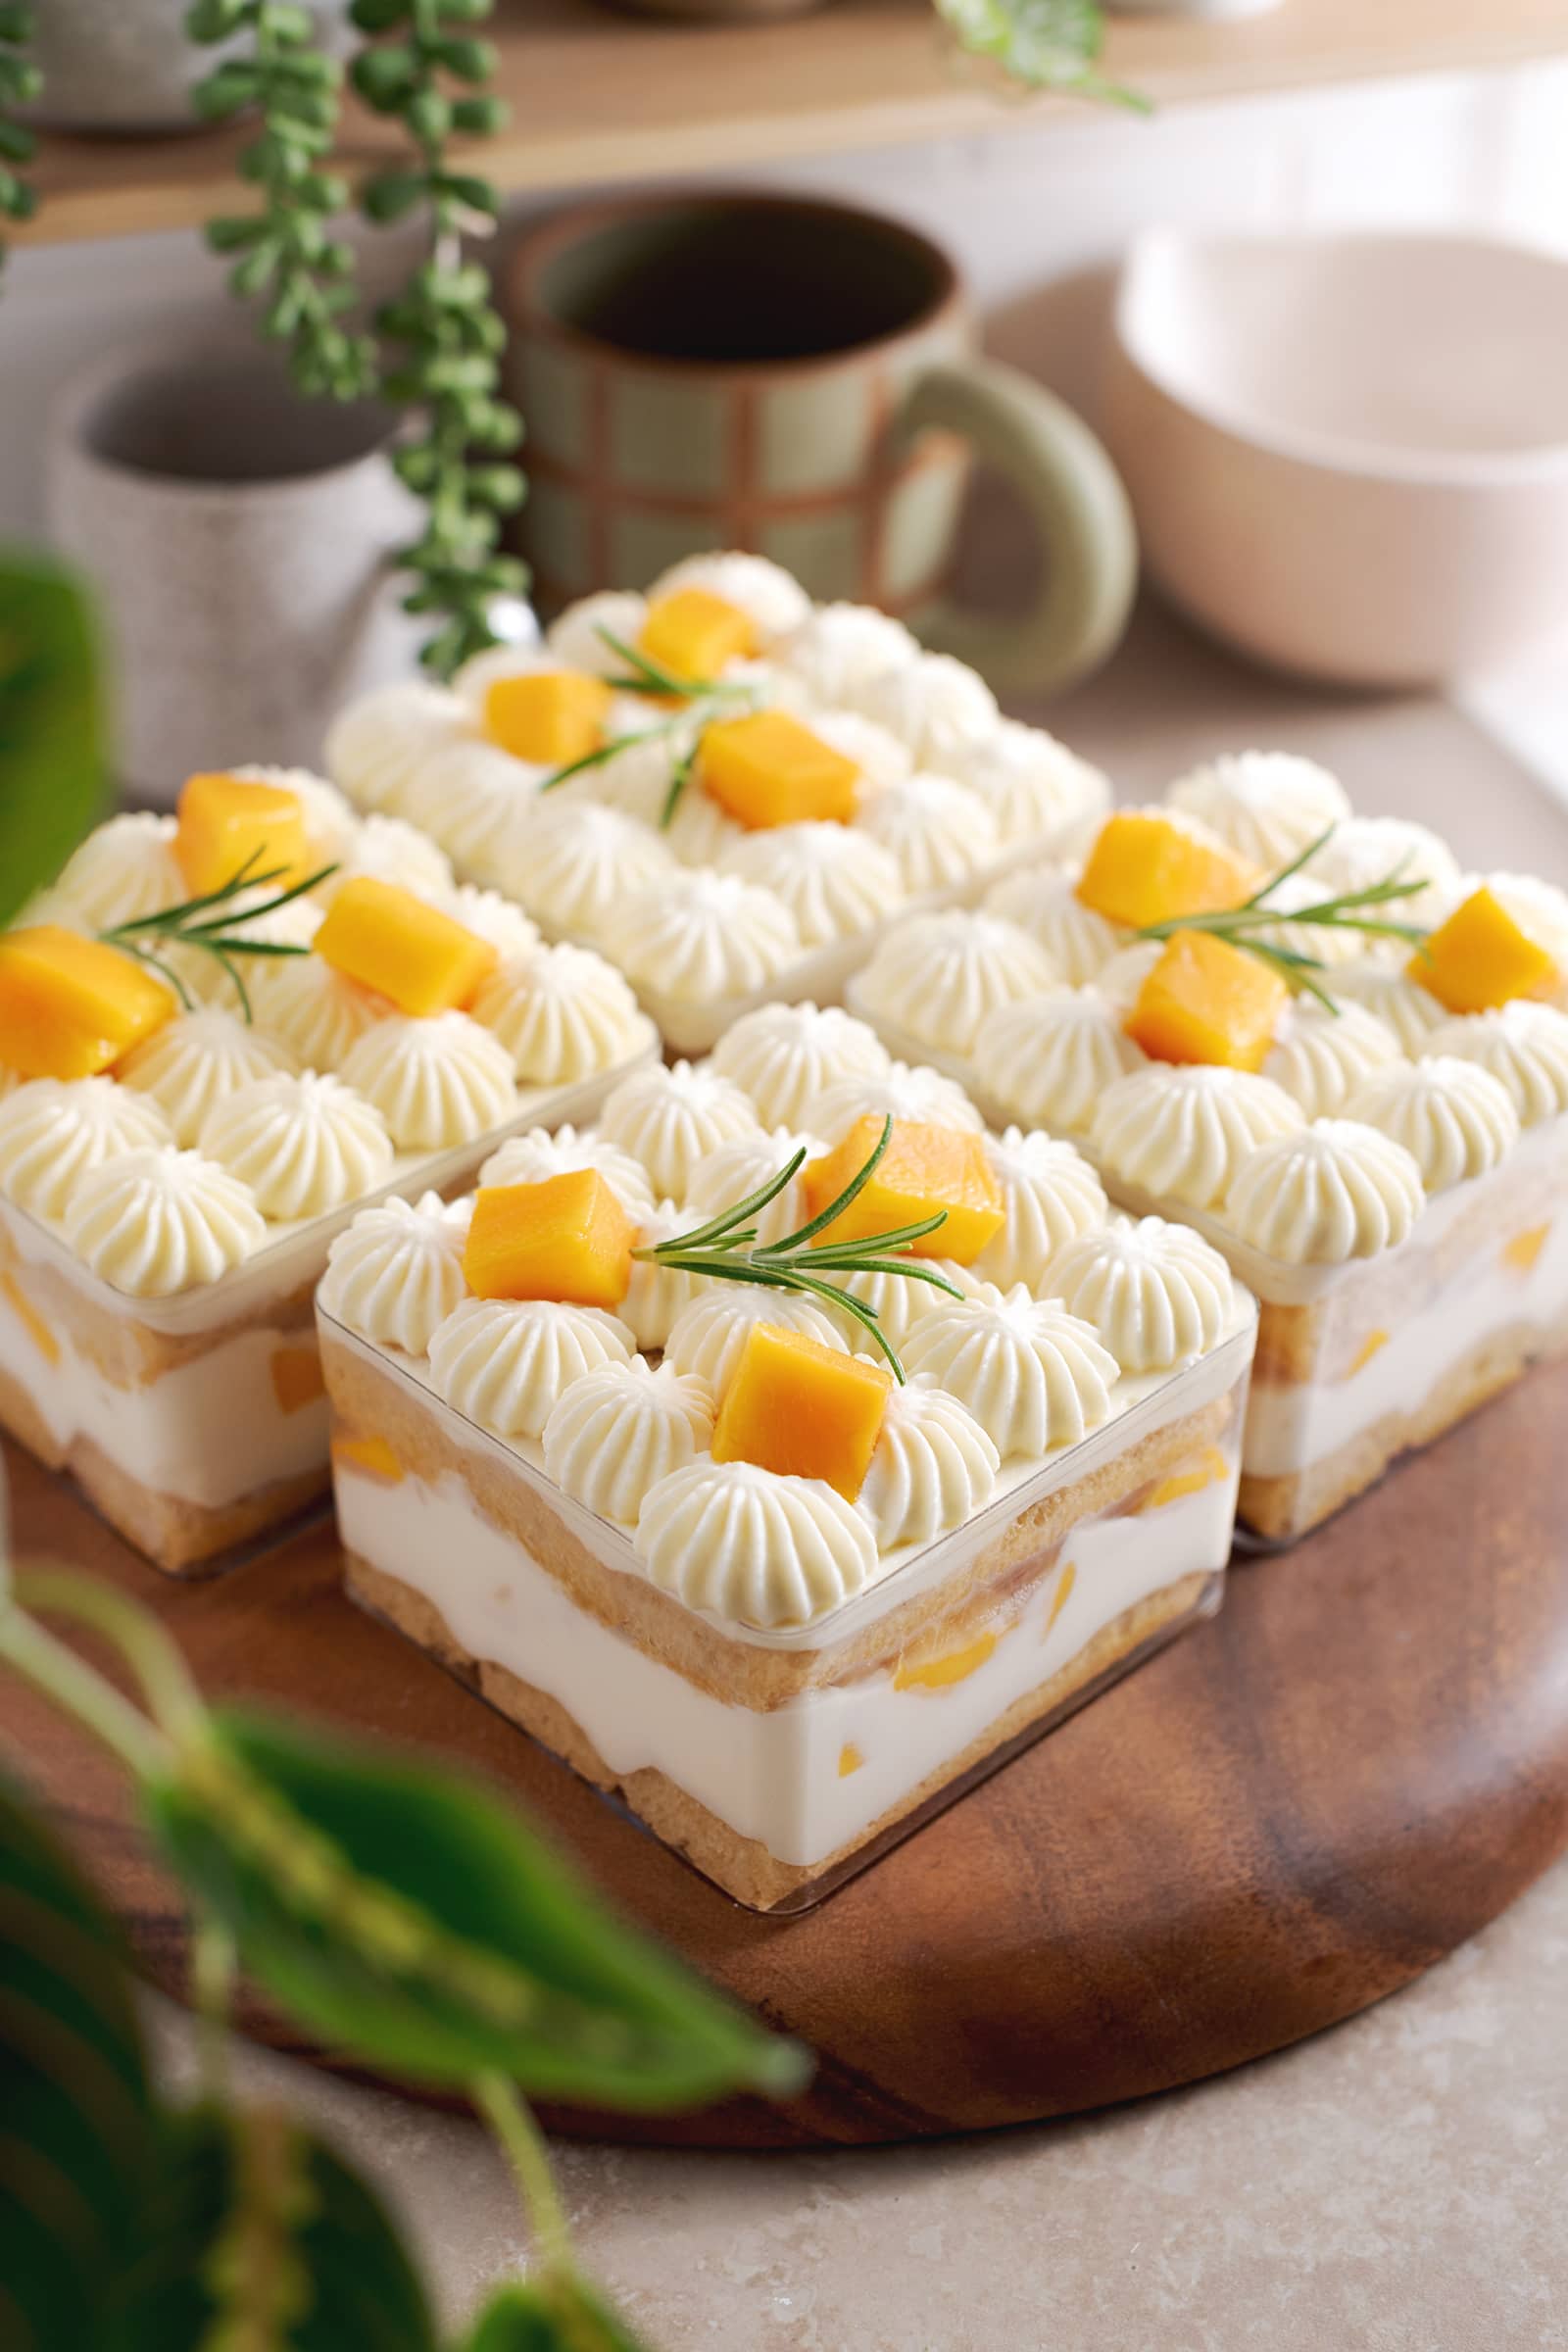 Four containers of mango tiramisu on a wooden platter with greenery around it.